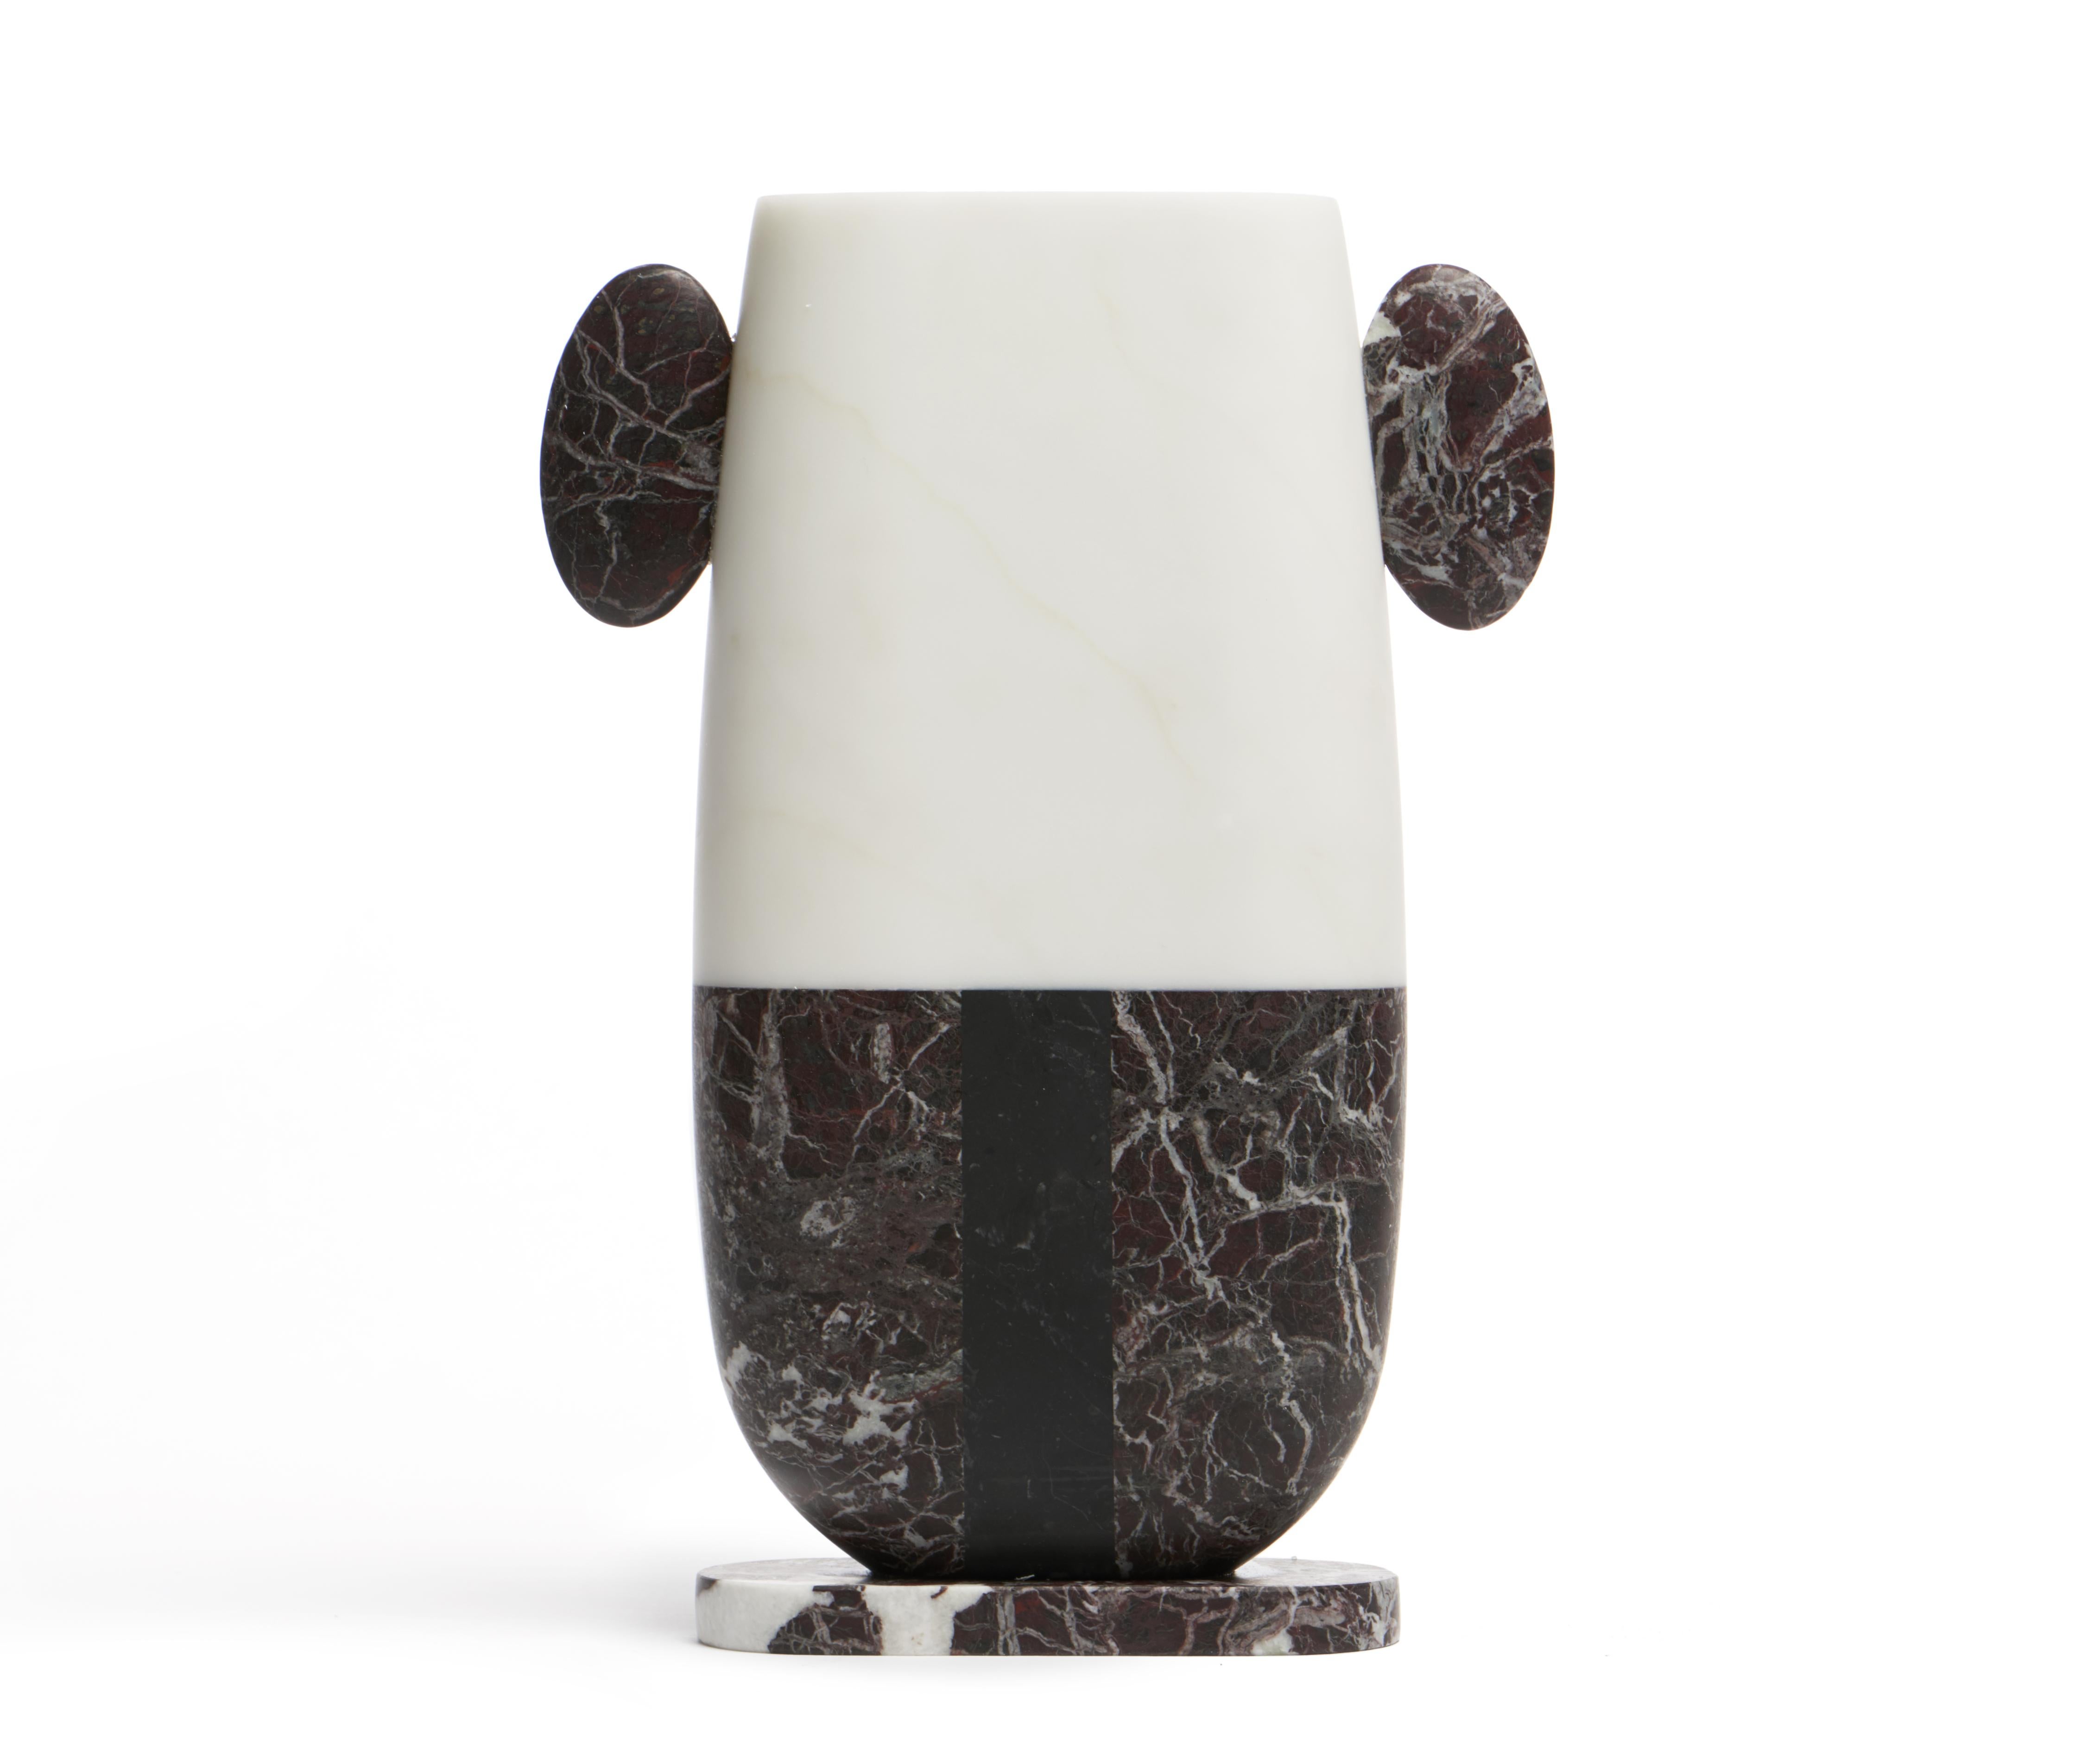 Italian New Modern Vase in White, Black and Red Marbles, creator Matteo Cibic Stock For Sale